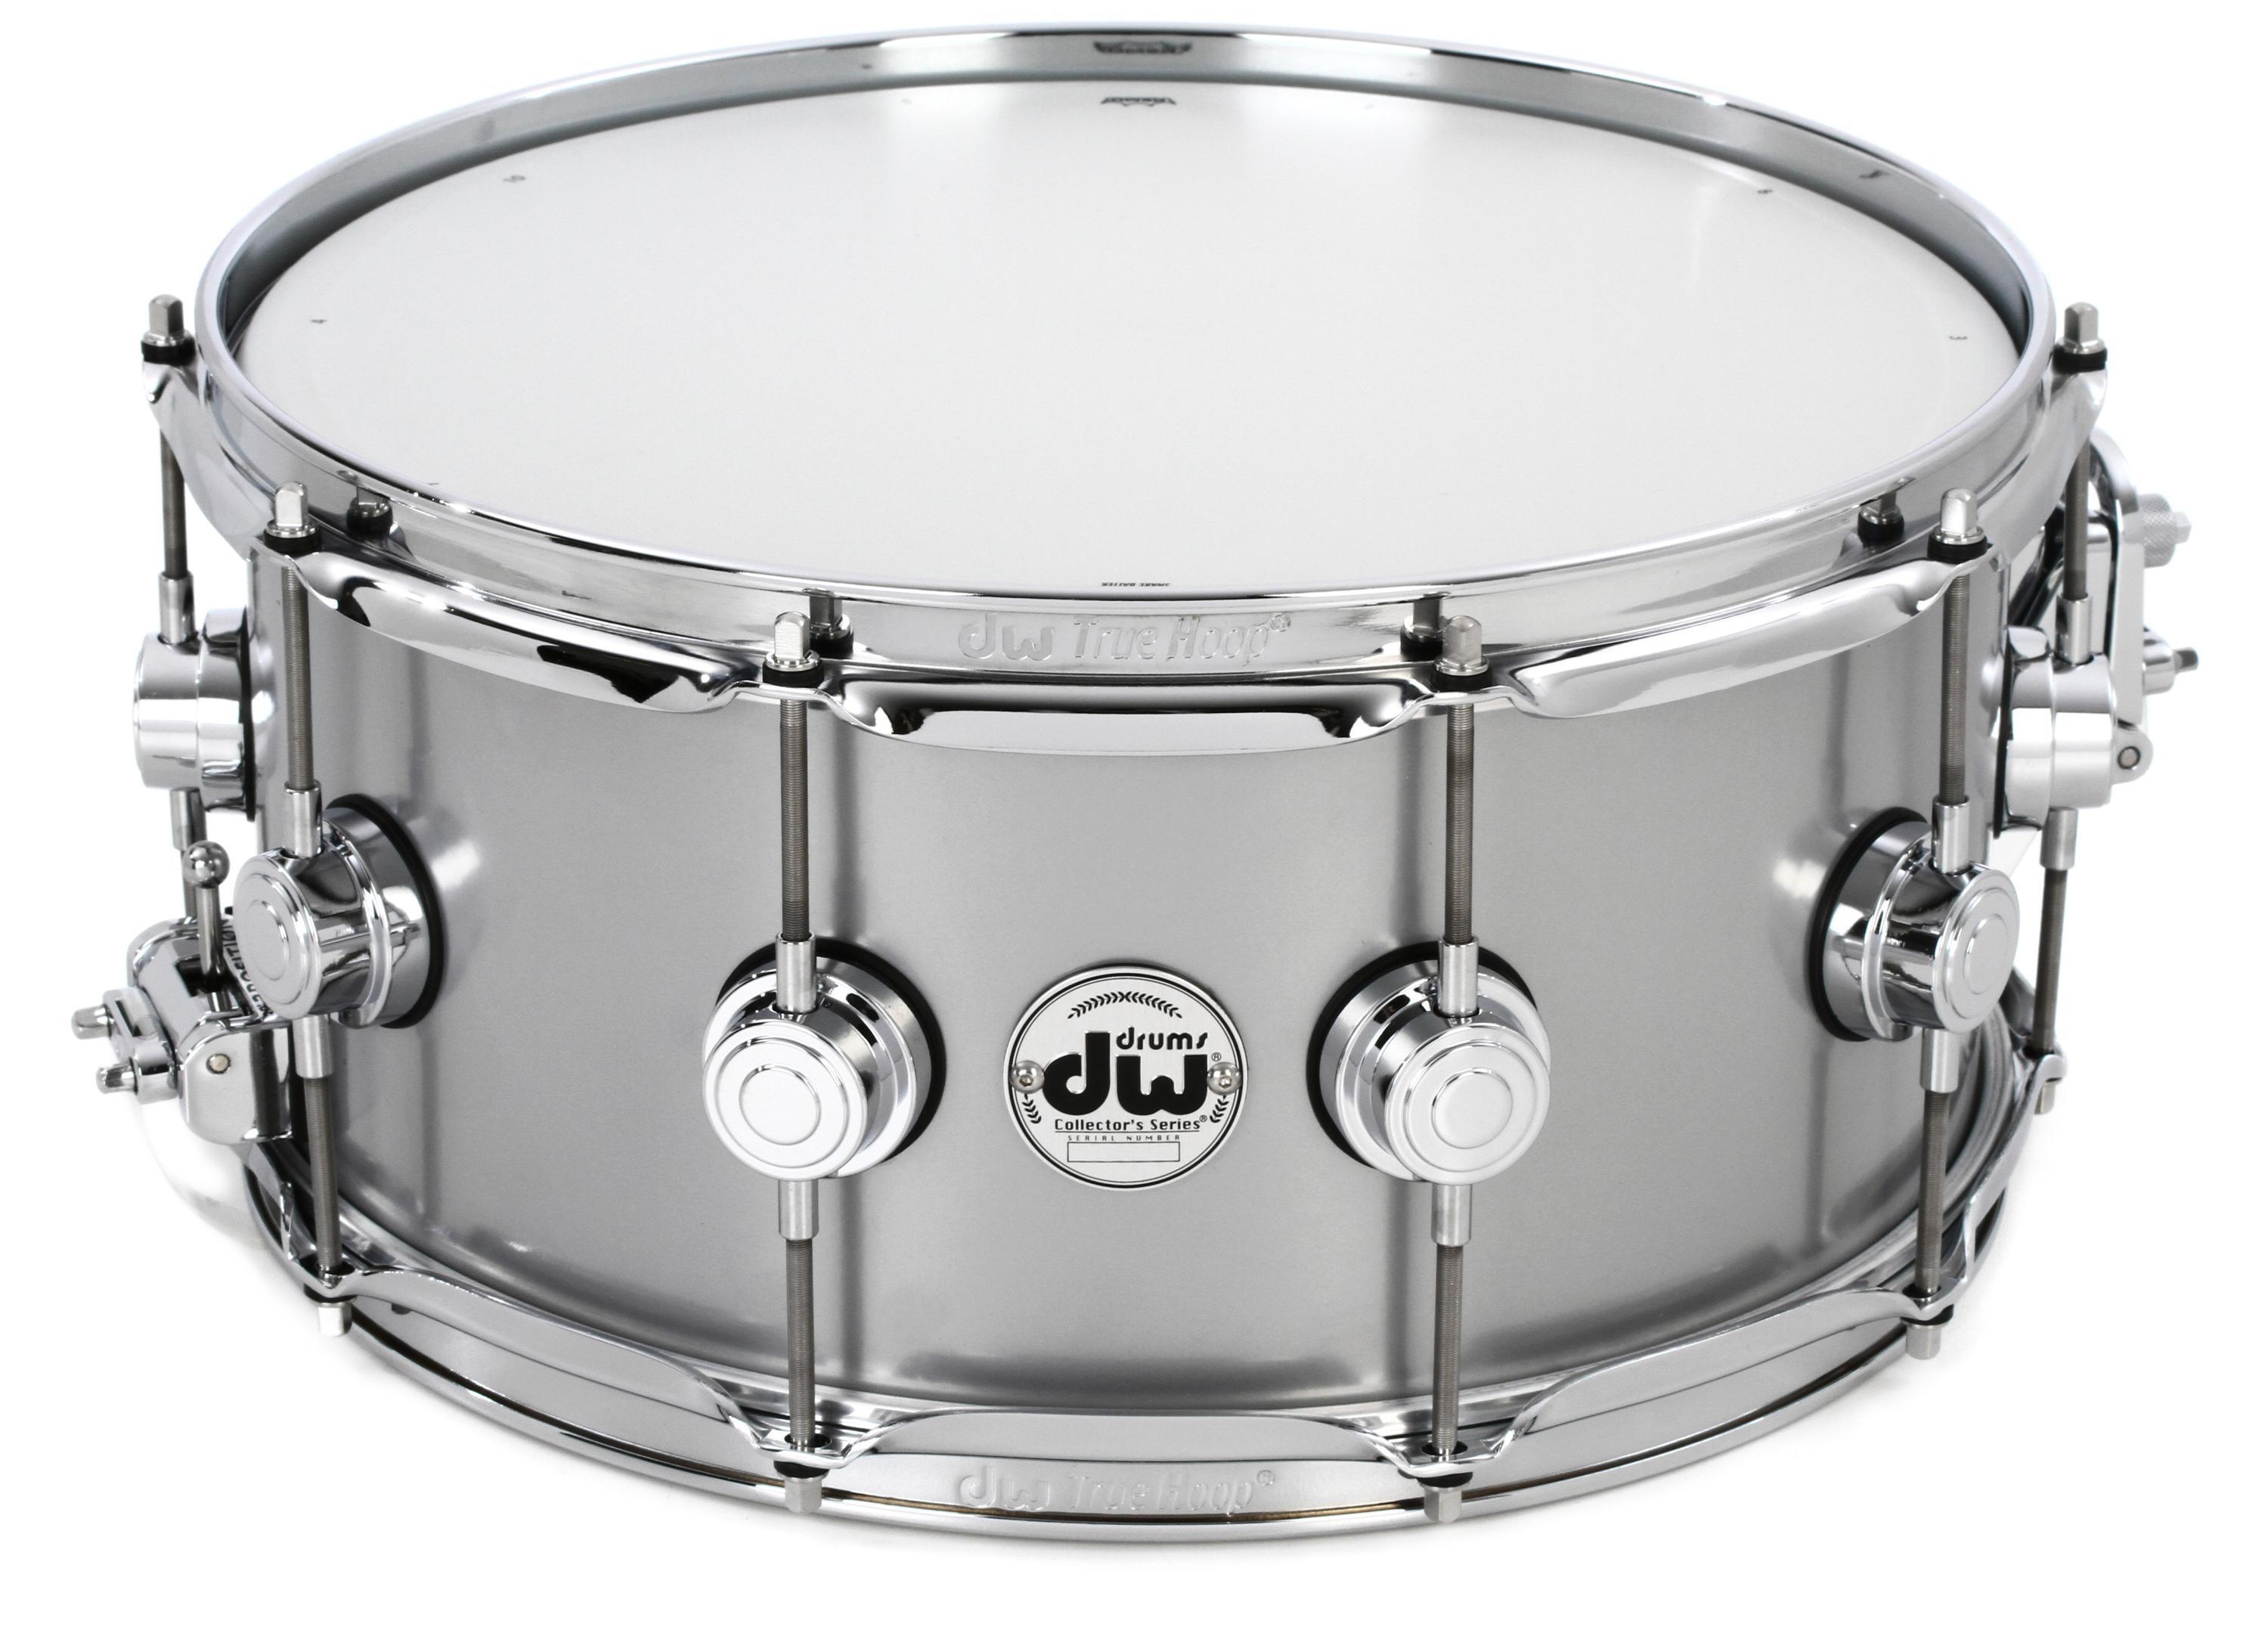 DW Collector's Series Metal Snare - 6.5 inch x 14 inch, Aluminum